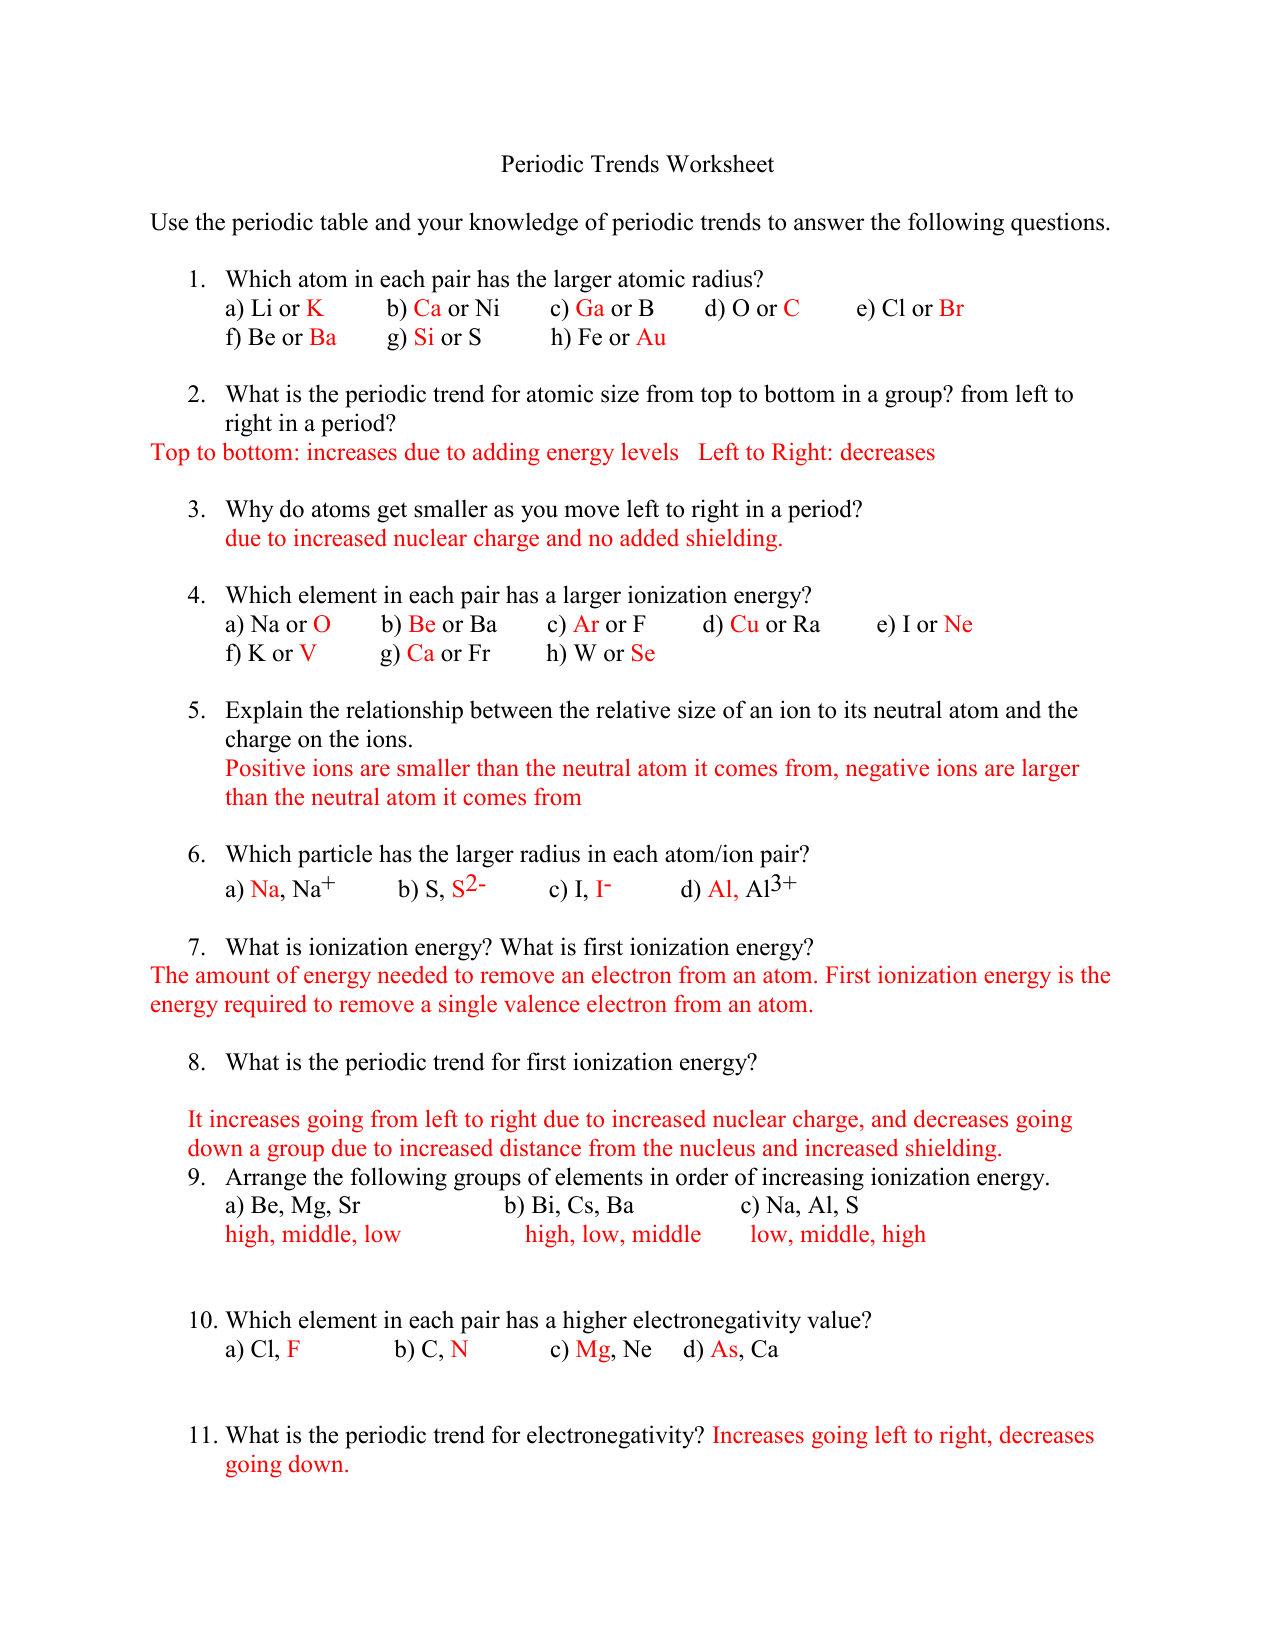 Periodic Trends Worksheet 11 answers Inside Worksheet Periodic Trends Answers